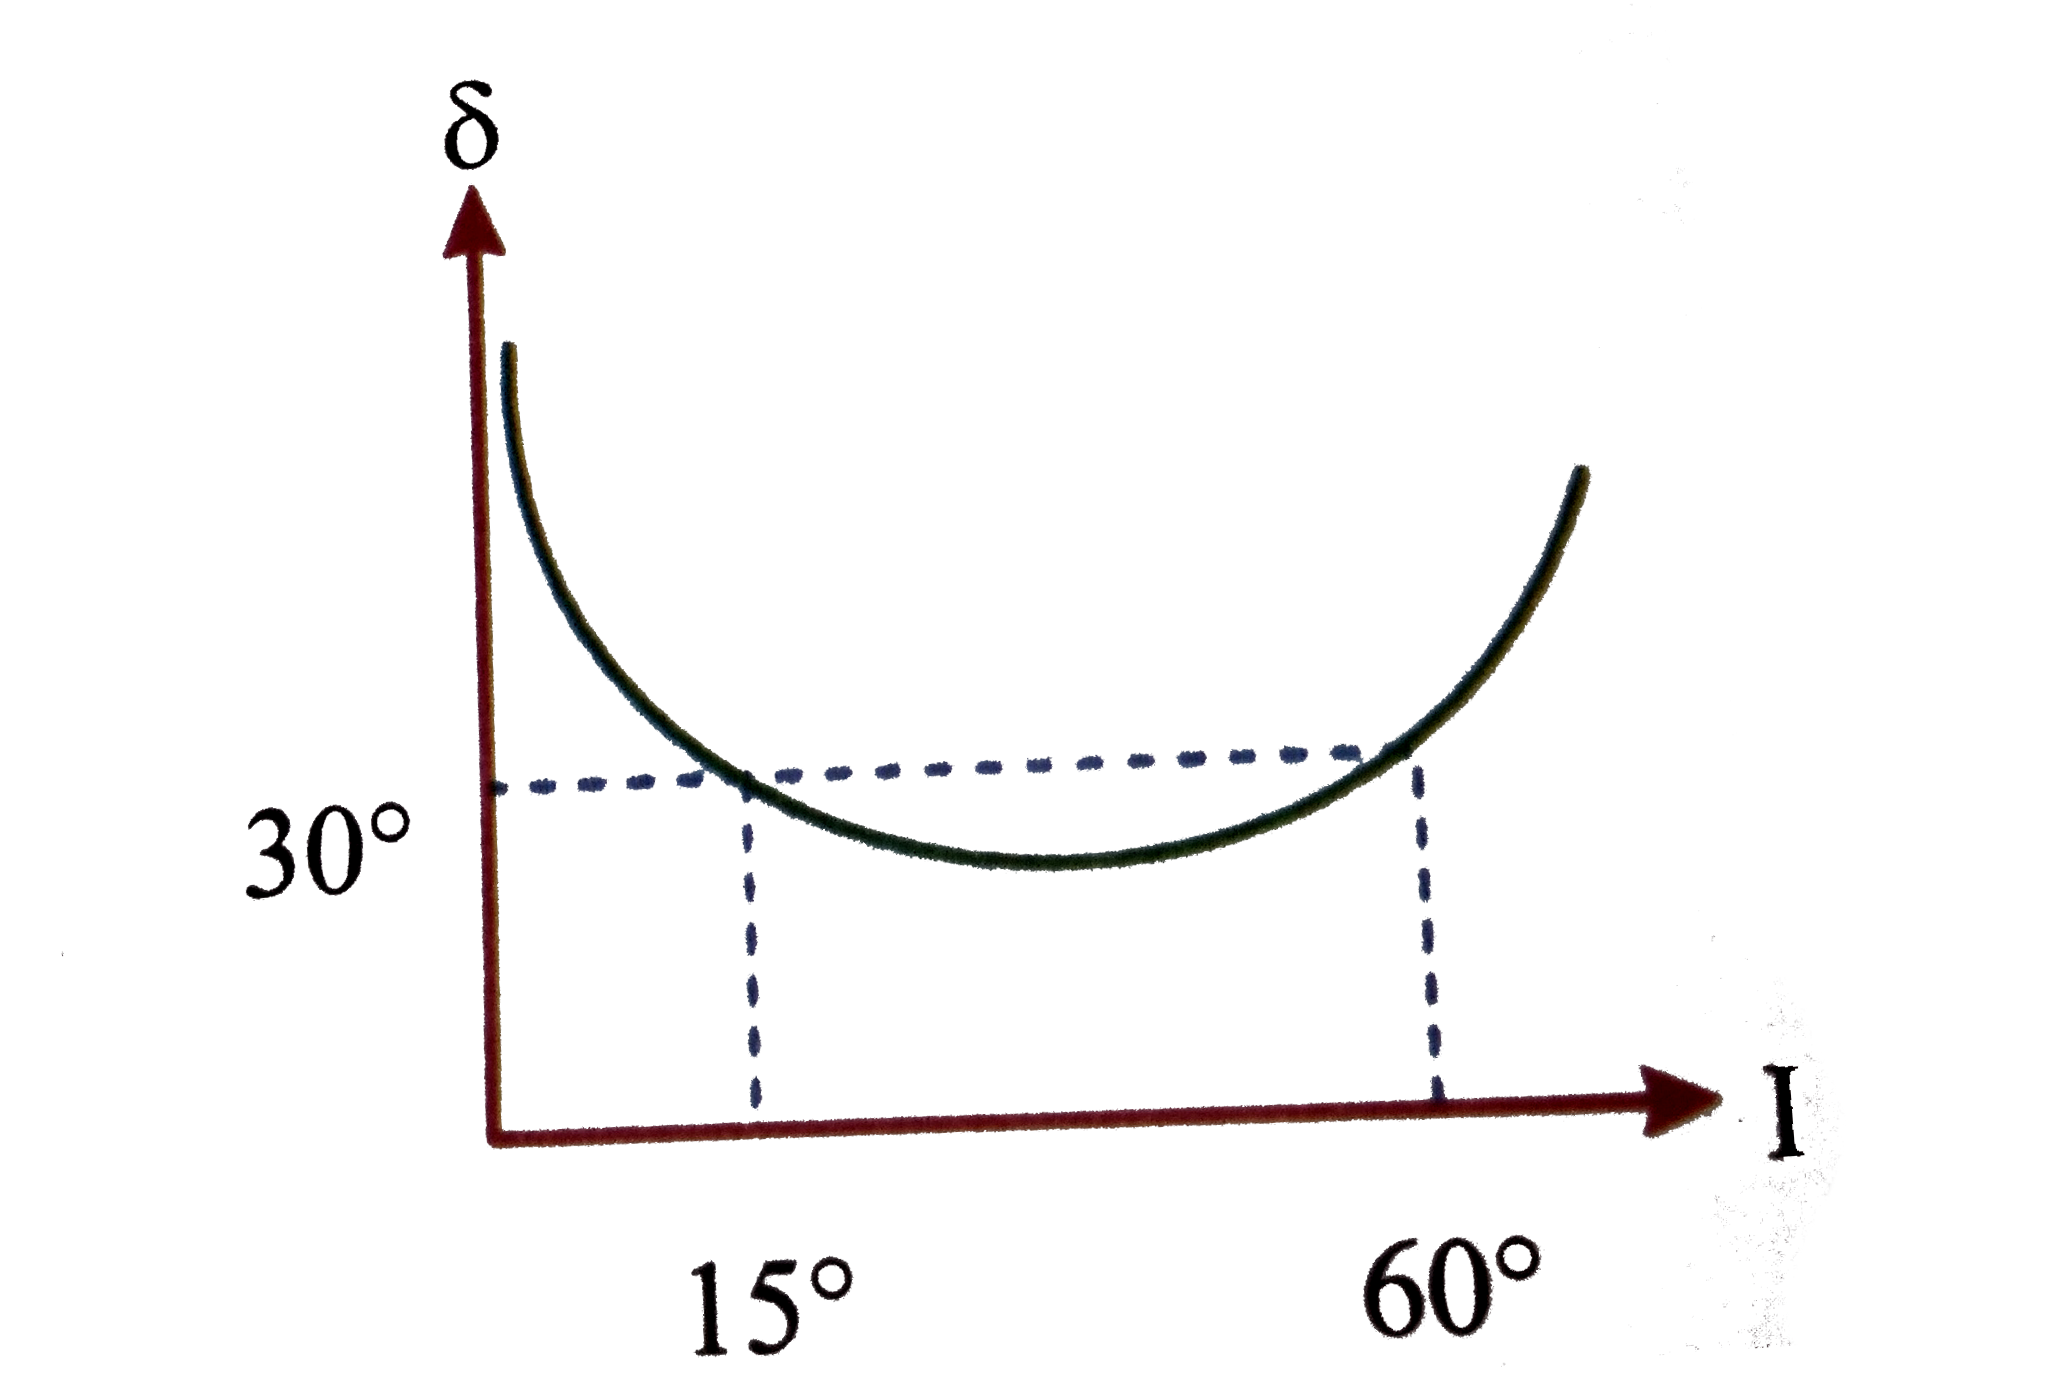 Figure shows the graph of angle of deviation del versus angle of incidence i for a light ray striking a prism. The prism angle is